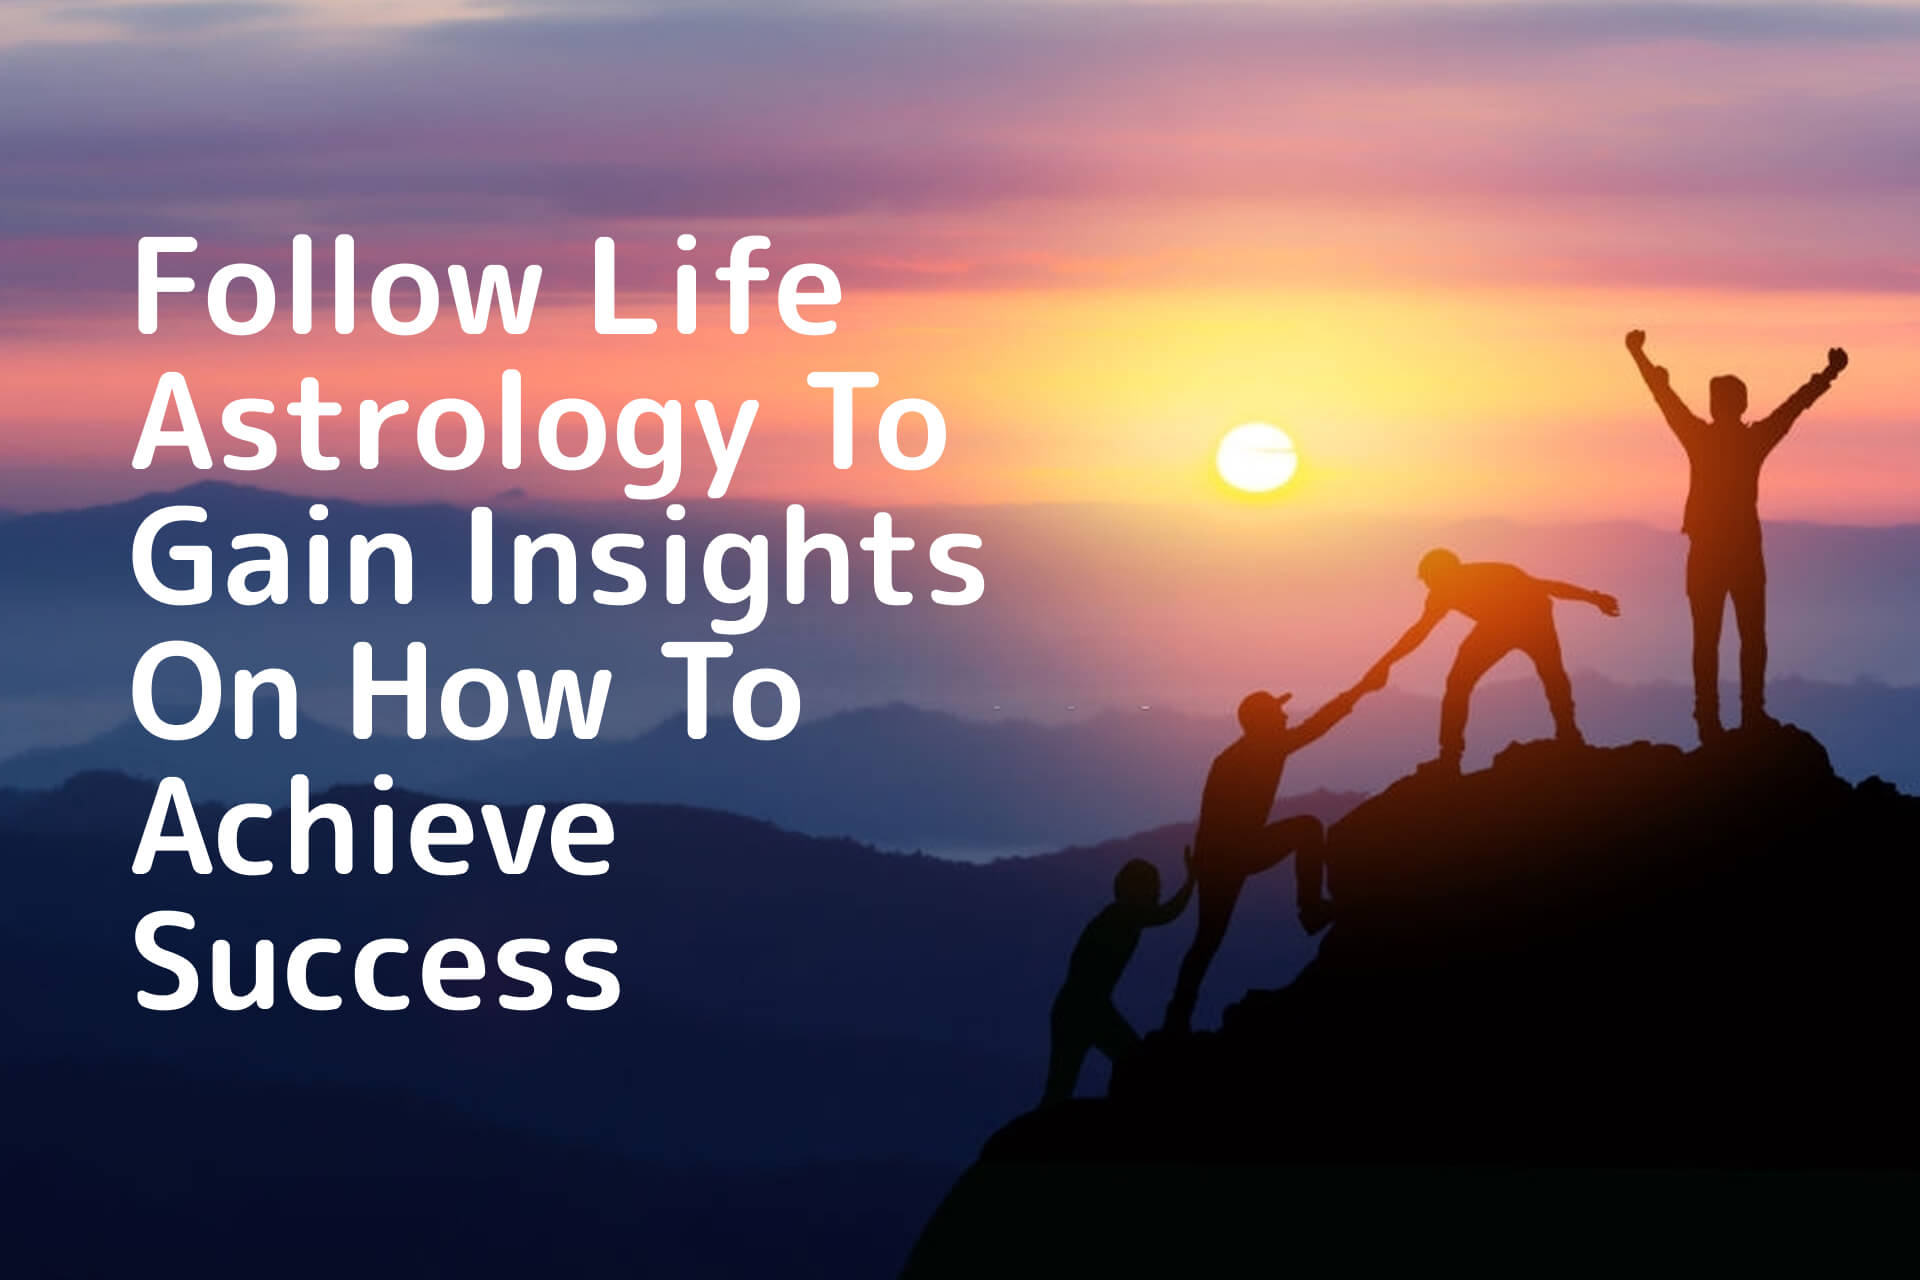 Follow Life Astrology To Gain Insights On How To Achieve Success